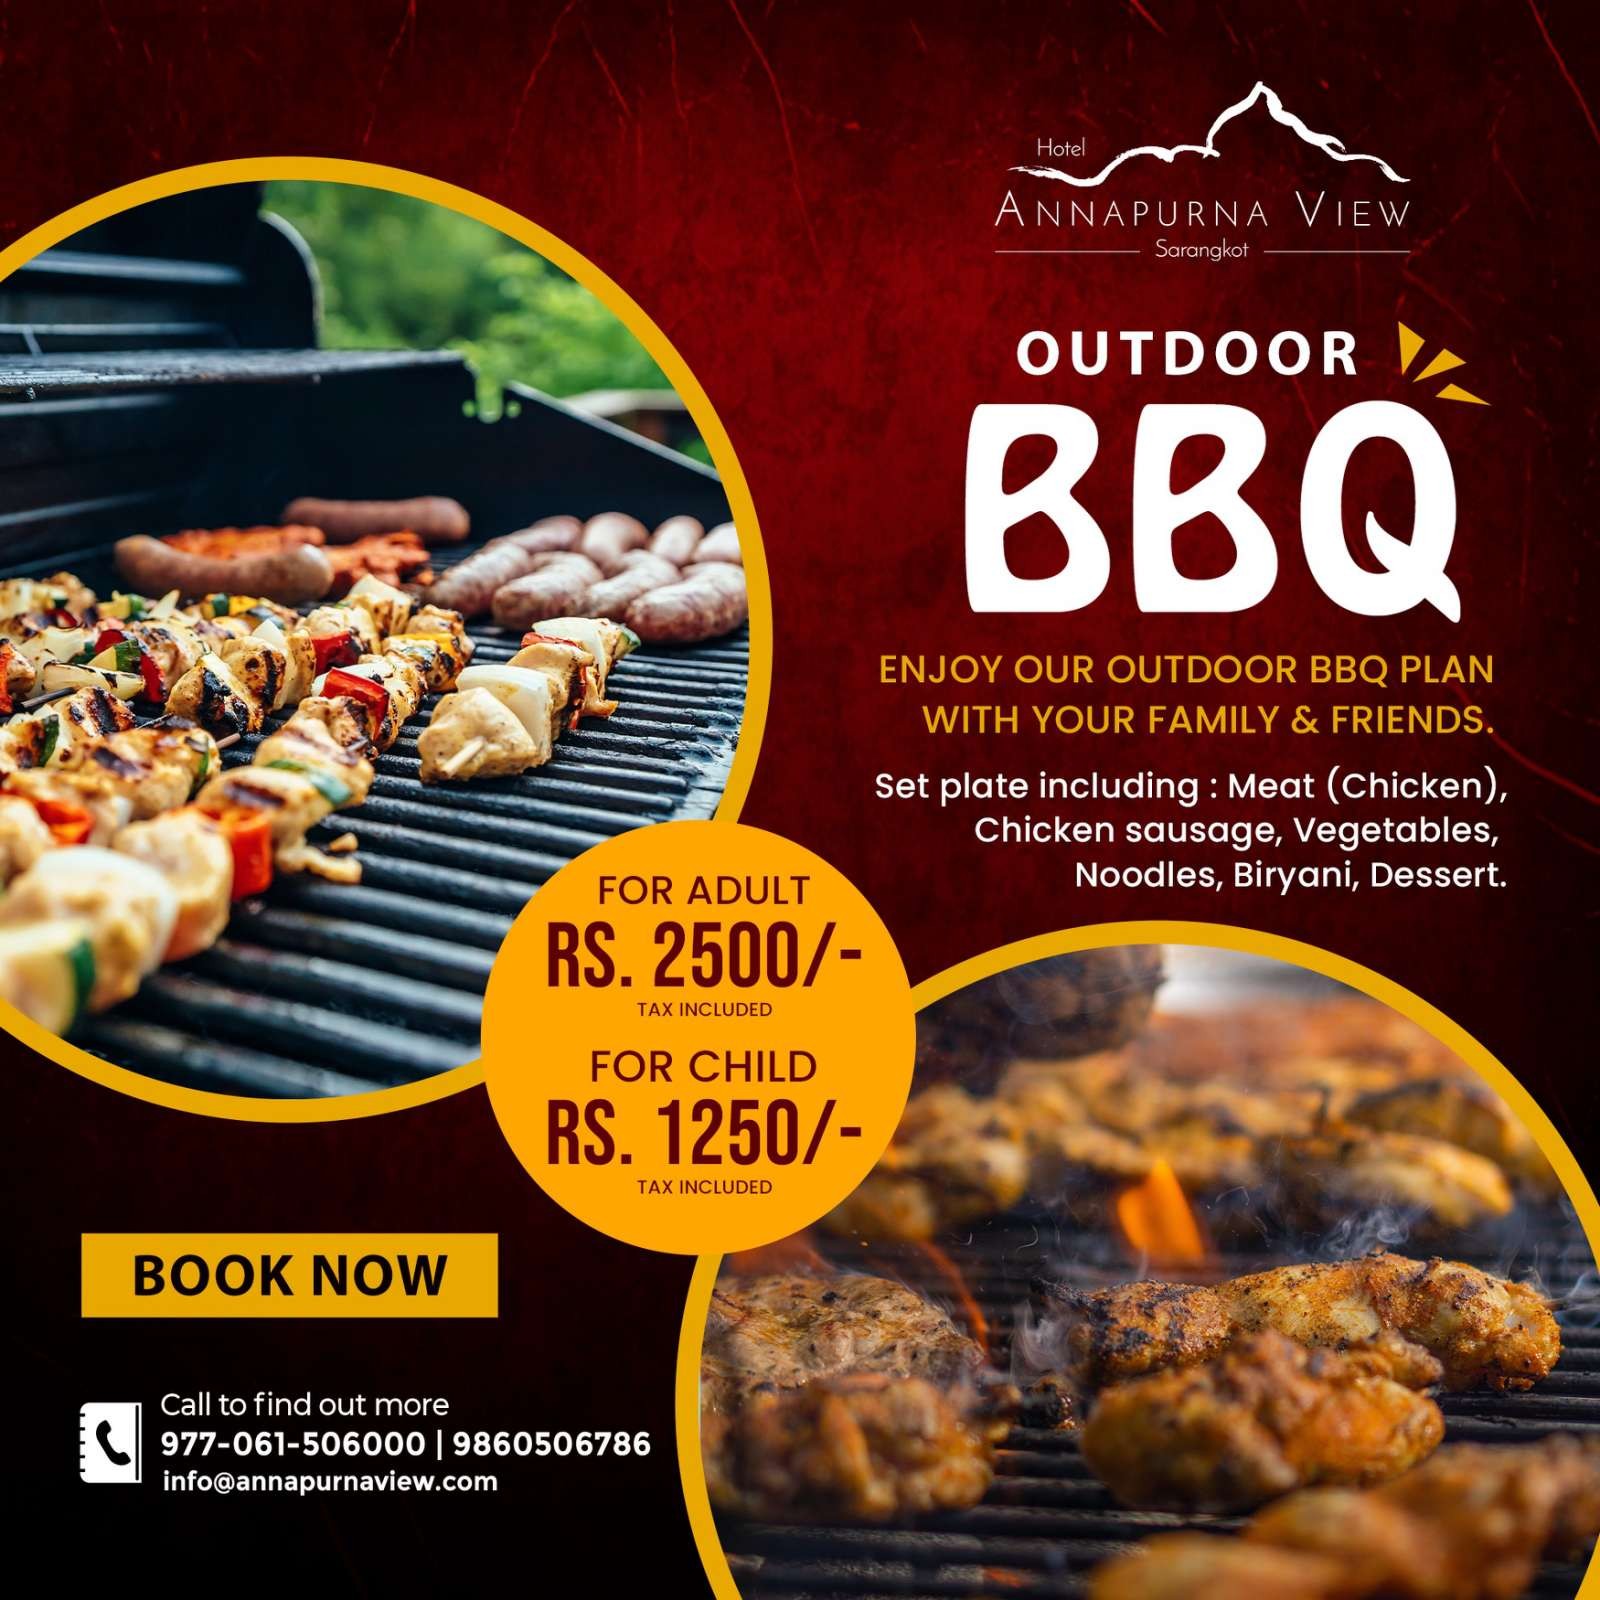 Outdoor BBQ package